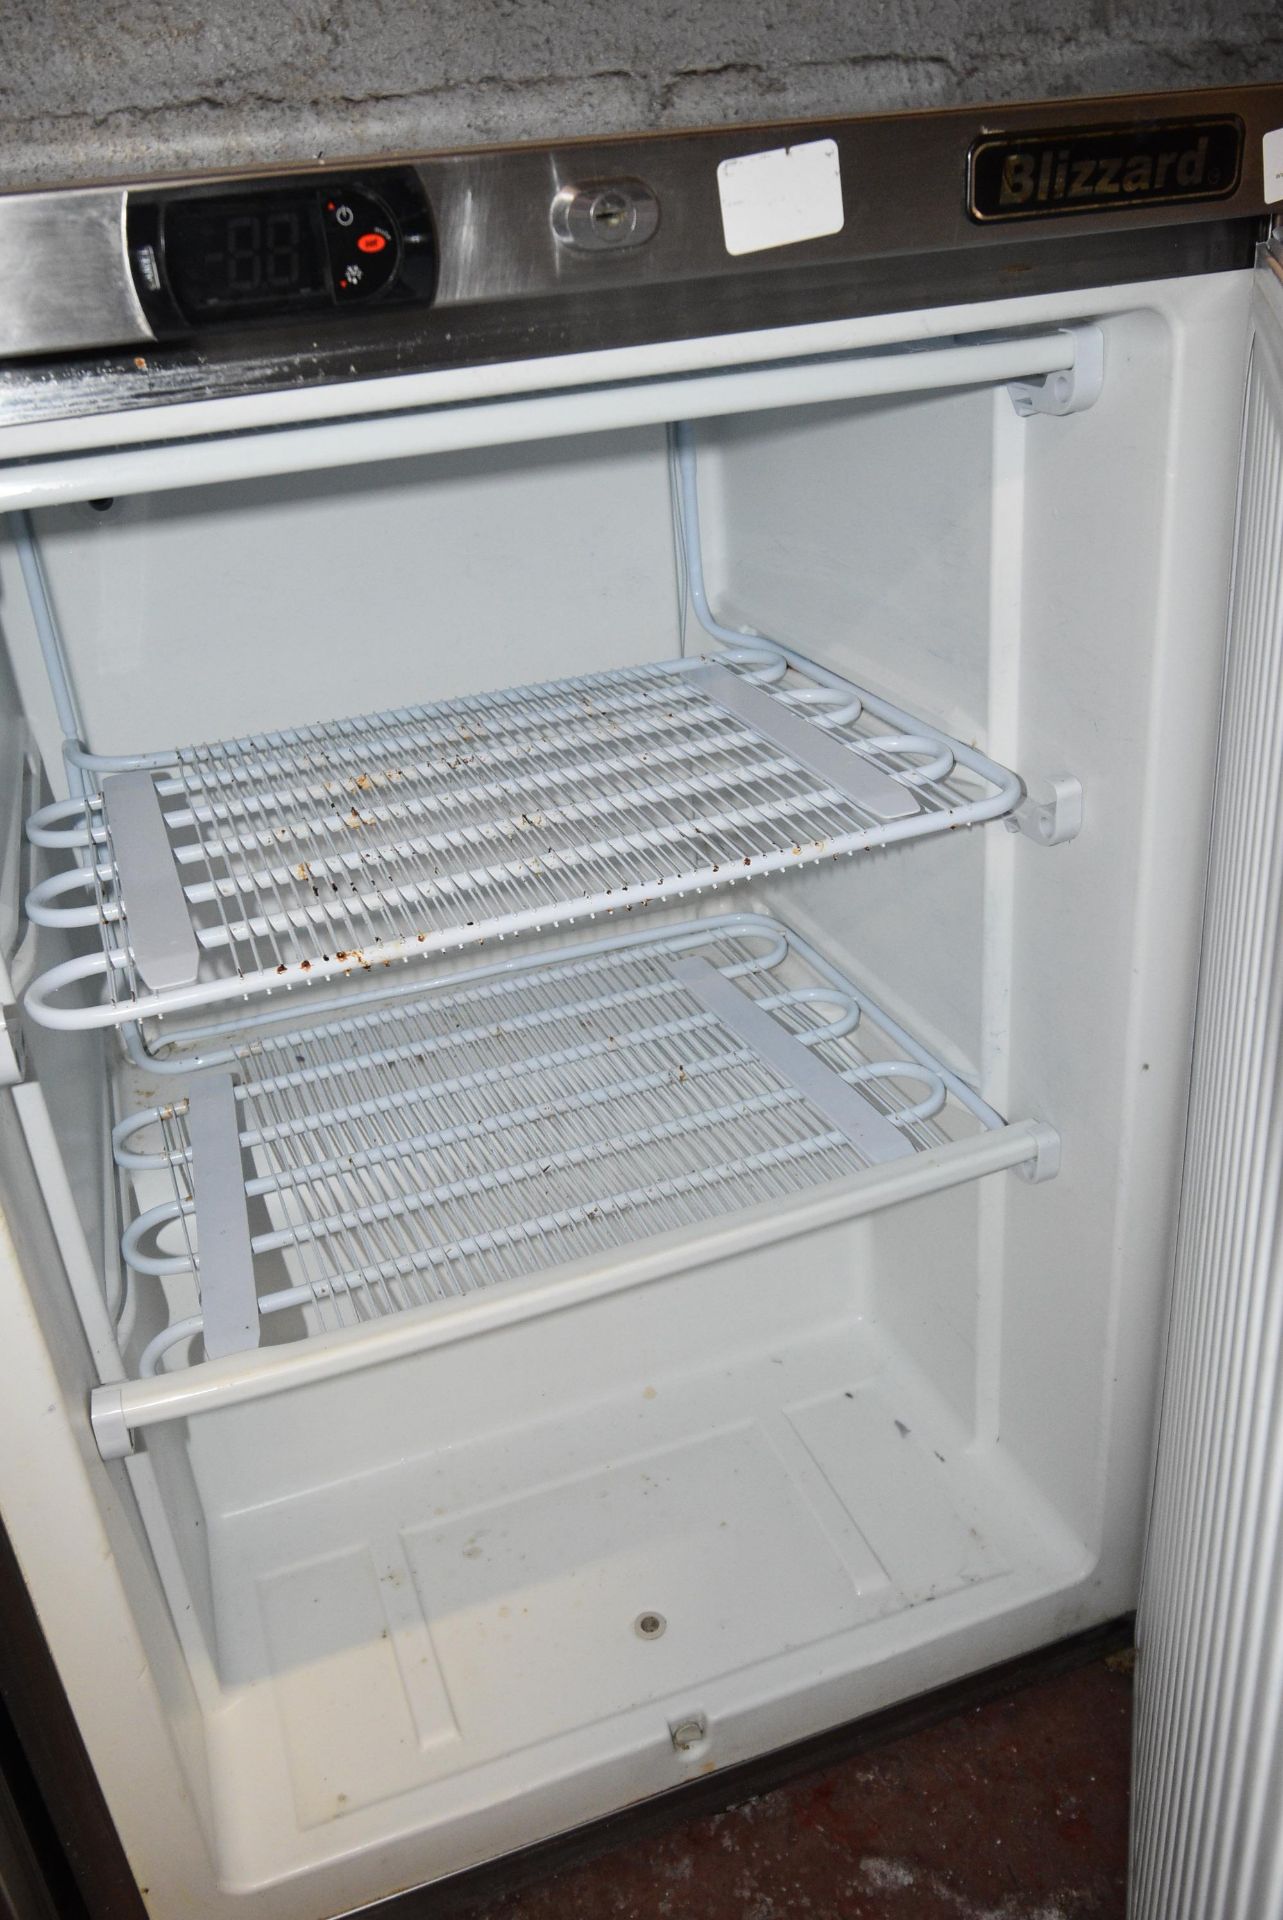 *Blizzard Stainless Stee Undercounter Freezer - Image 2 of 2